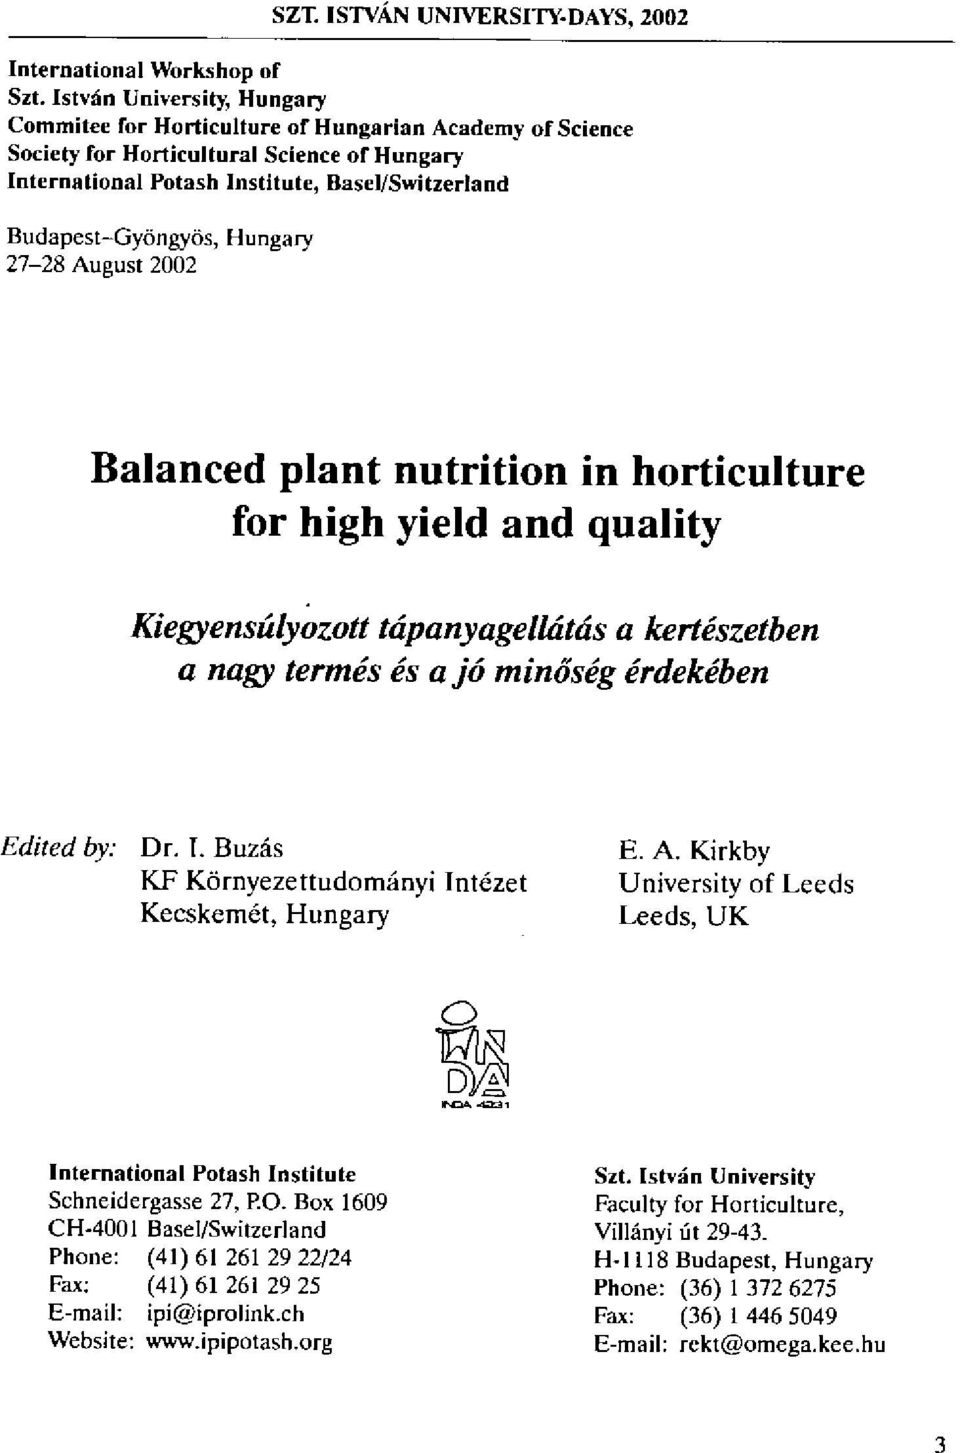 Hungary 27-28 August 2002 Balanced plant nutrition in horticulture for high yield and quality Kiegyensdilyozott tdpanyagelldtds a kert~szetben a nagy termes es a j6 mindsdg crdekdben Edited by: Dr. I.